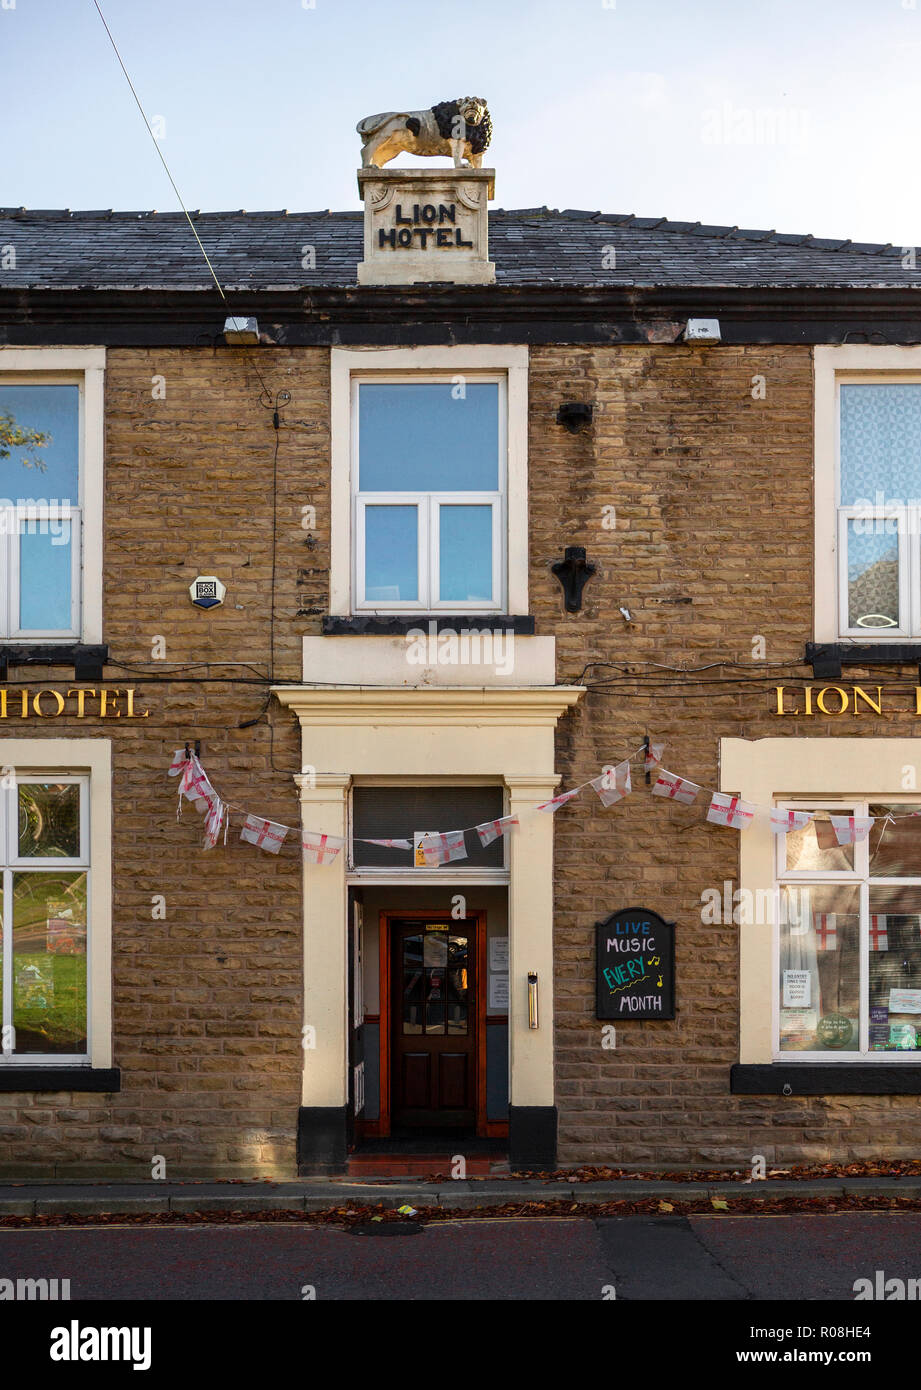 The Lion Hotel, Blackburn. An old public house in brown stone. Stock Photo